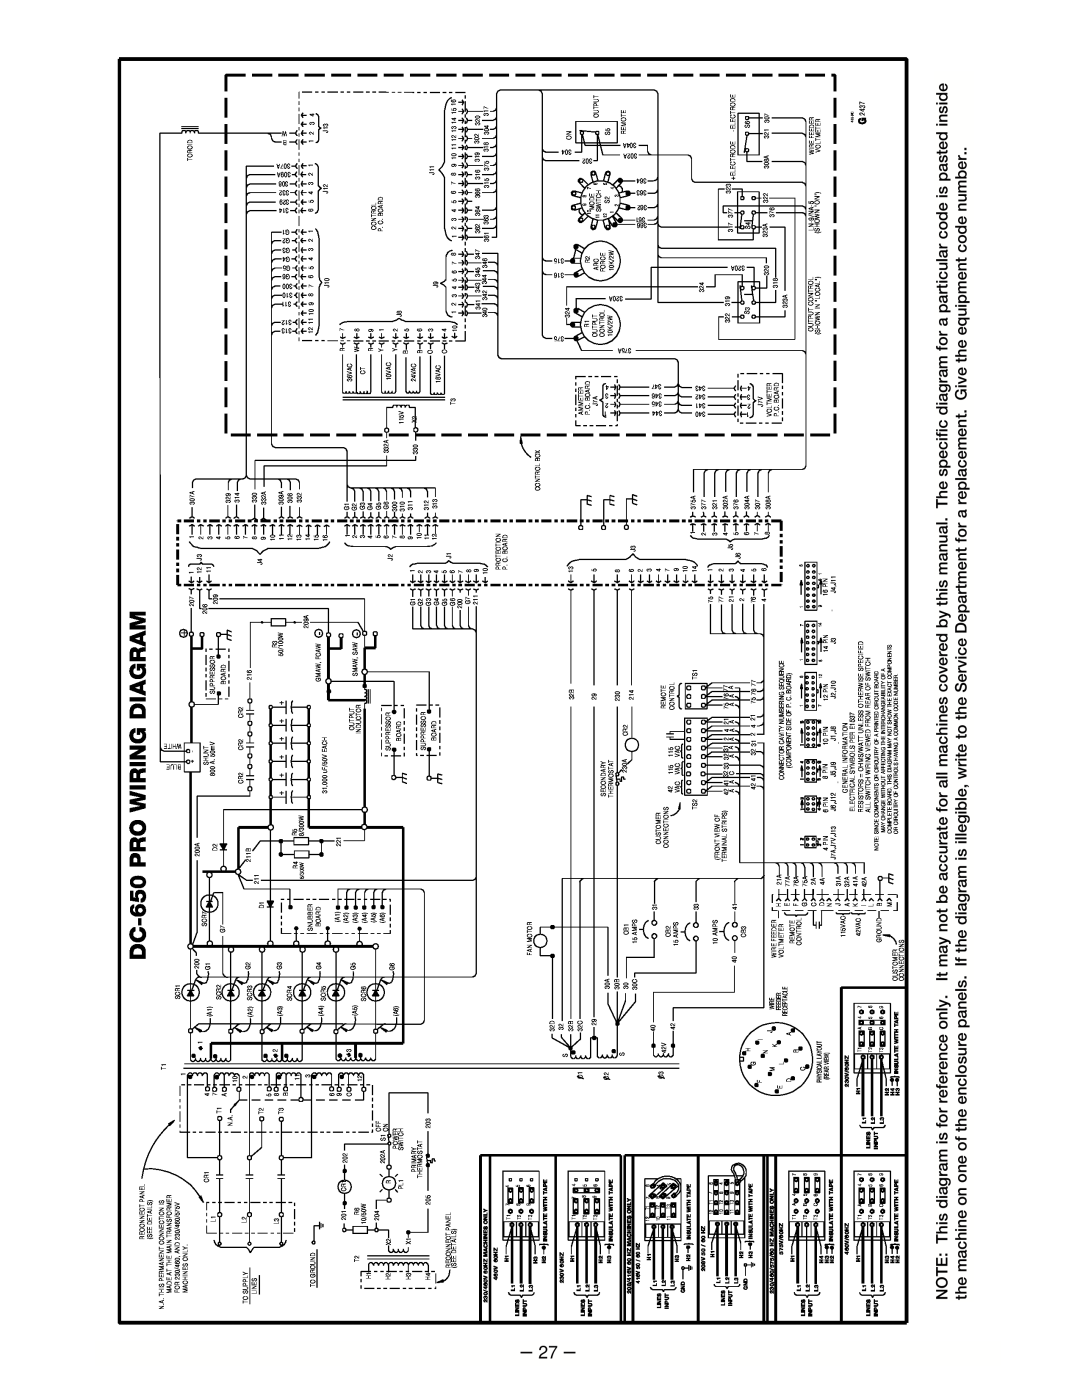 Lincoln Electric IM463-A manual 27, DC-650PRO WIRING DIAGRAM 